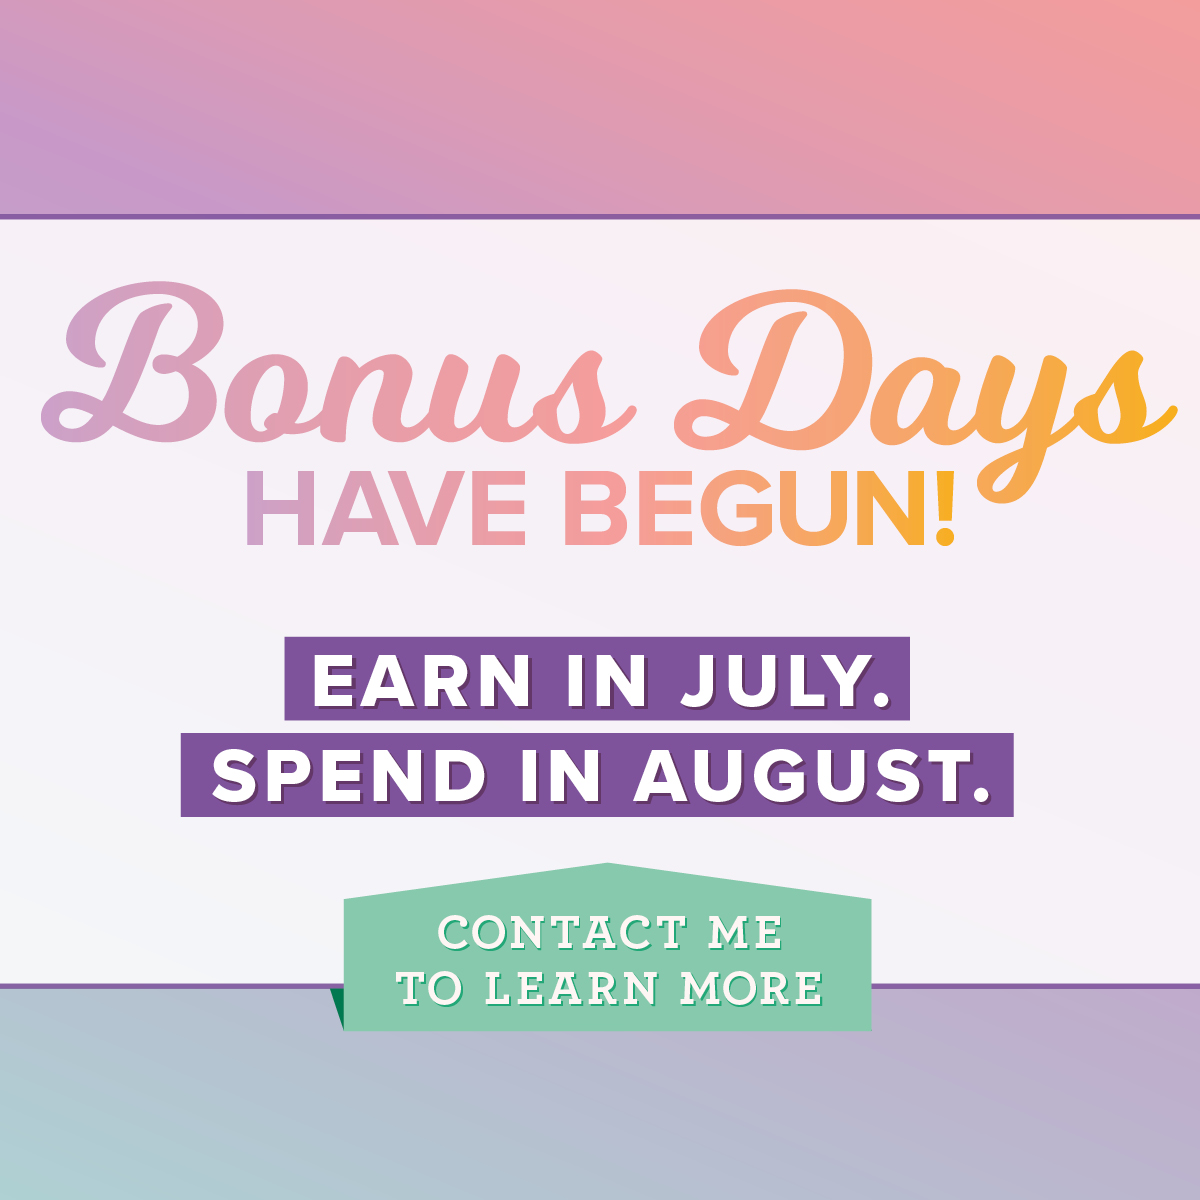 Bonus Days from Stampin' Up! has begun! for every $50 you spend before July 31 (before shipping and tax) earns a $5 Bonus Days coupon code that can be used August 1–31. Visit my blog here for details: https://wp.me/p59VWq-ad4 #stampinup #promotion #thestampcamp